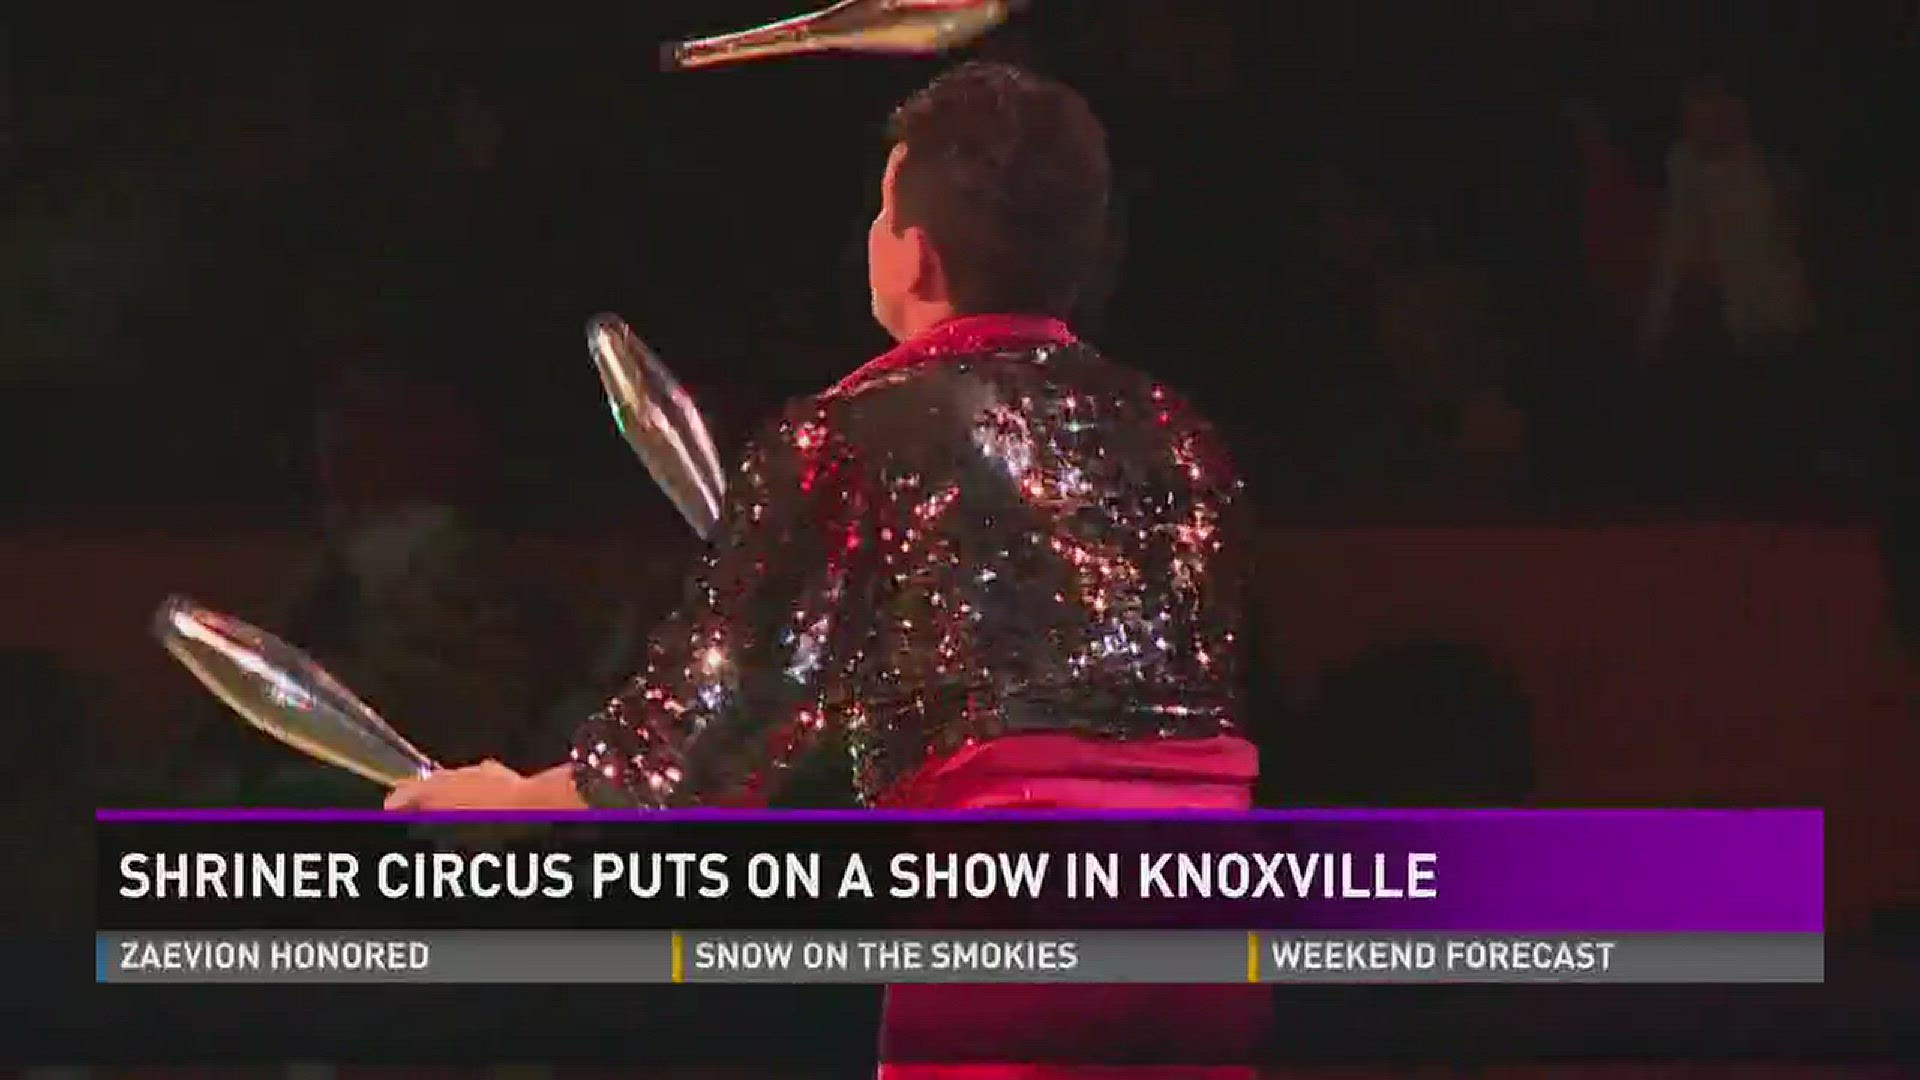 Oct. 21, 2016: The Kerbela Shriners in Knoxville put on a big show with their annual "Shrine Circus" at Thompson Boling arena.